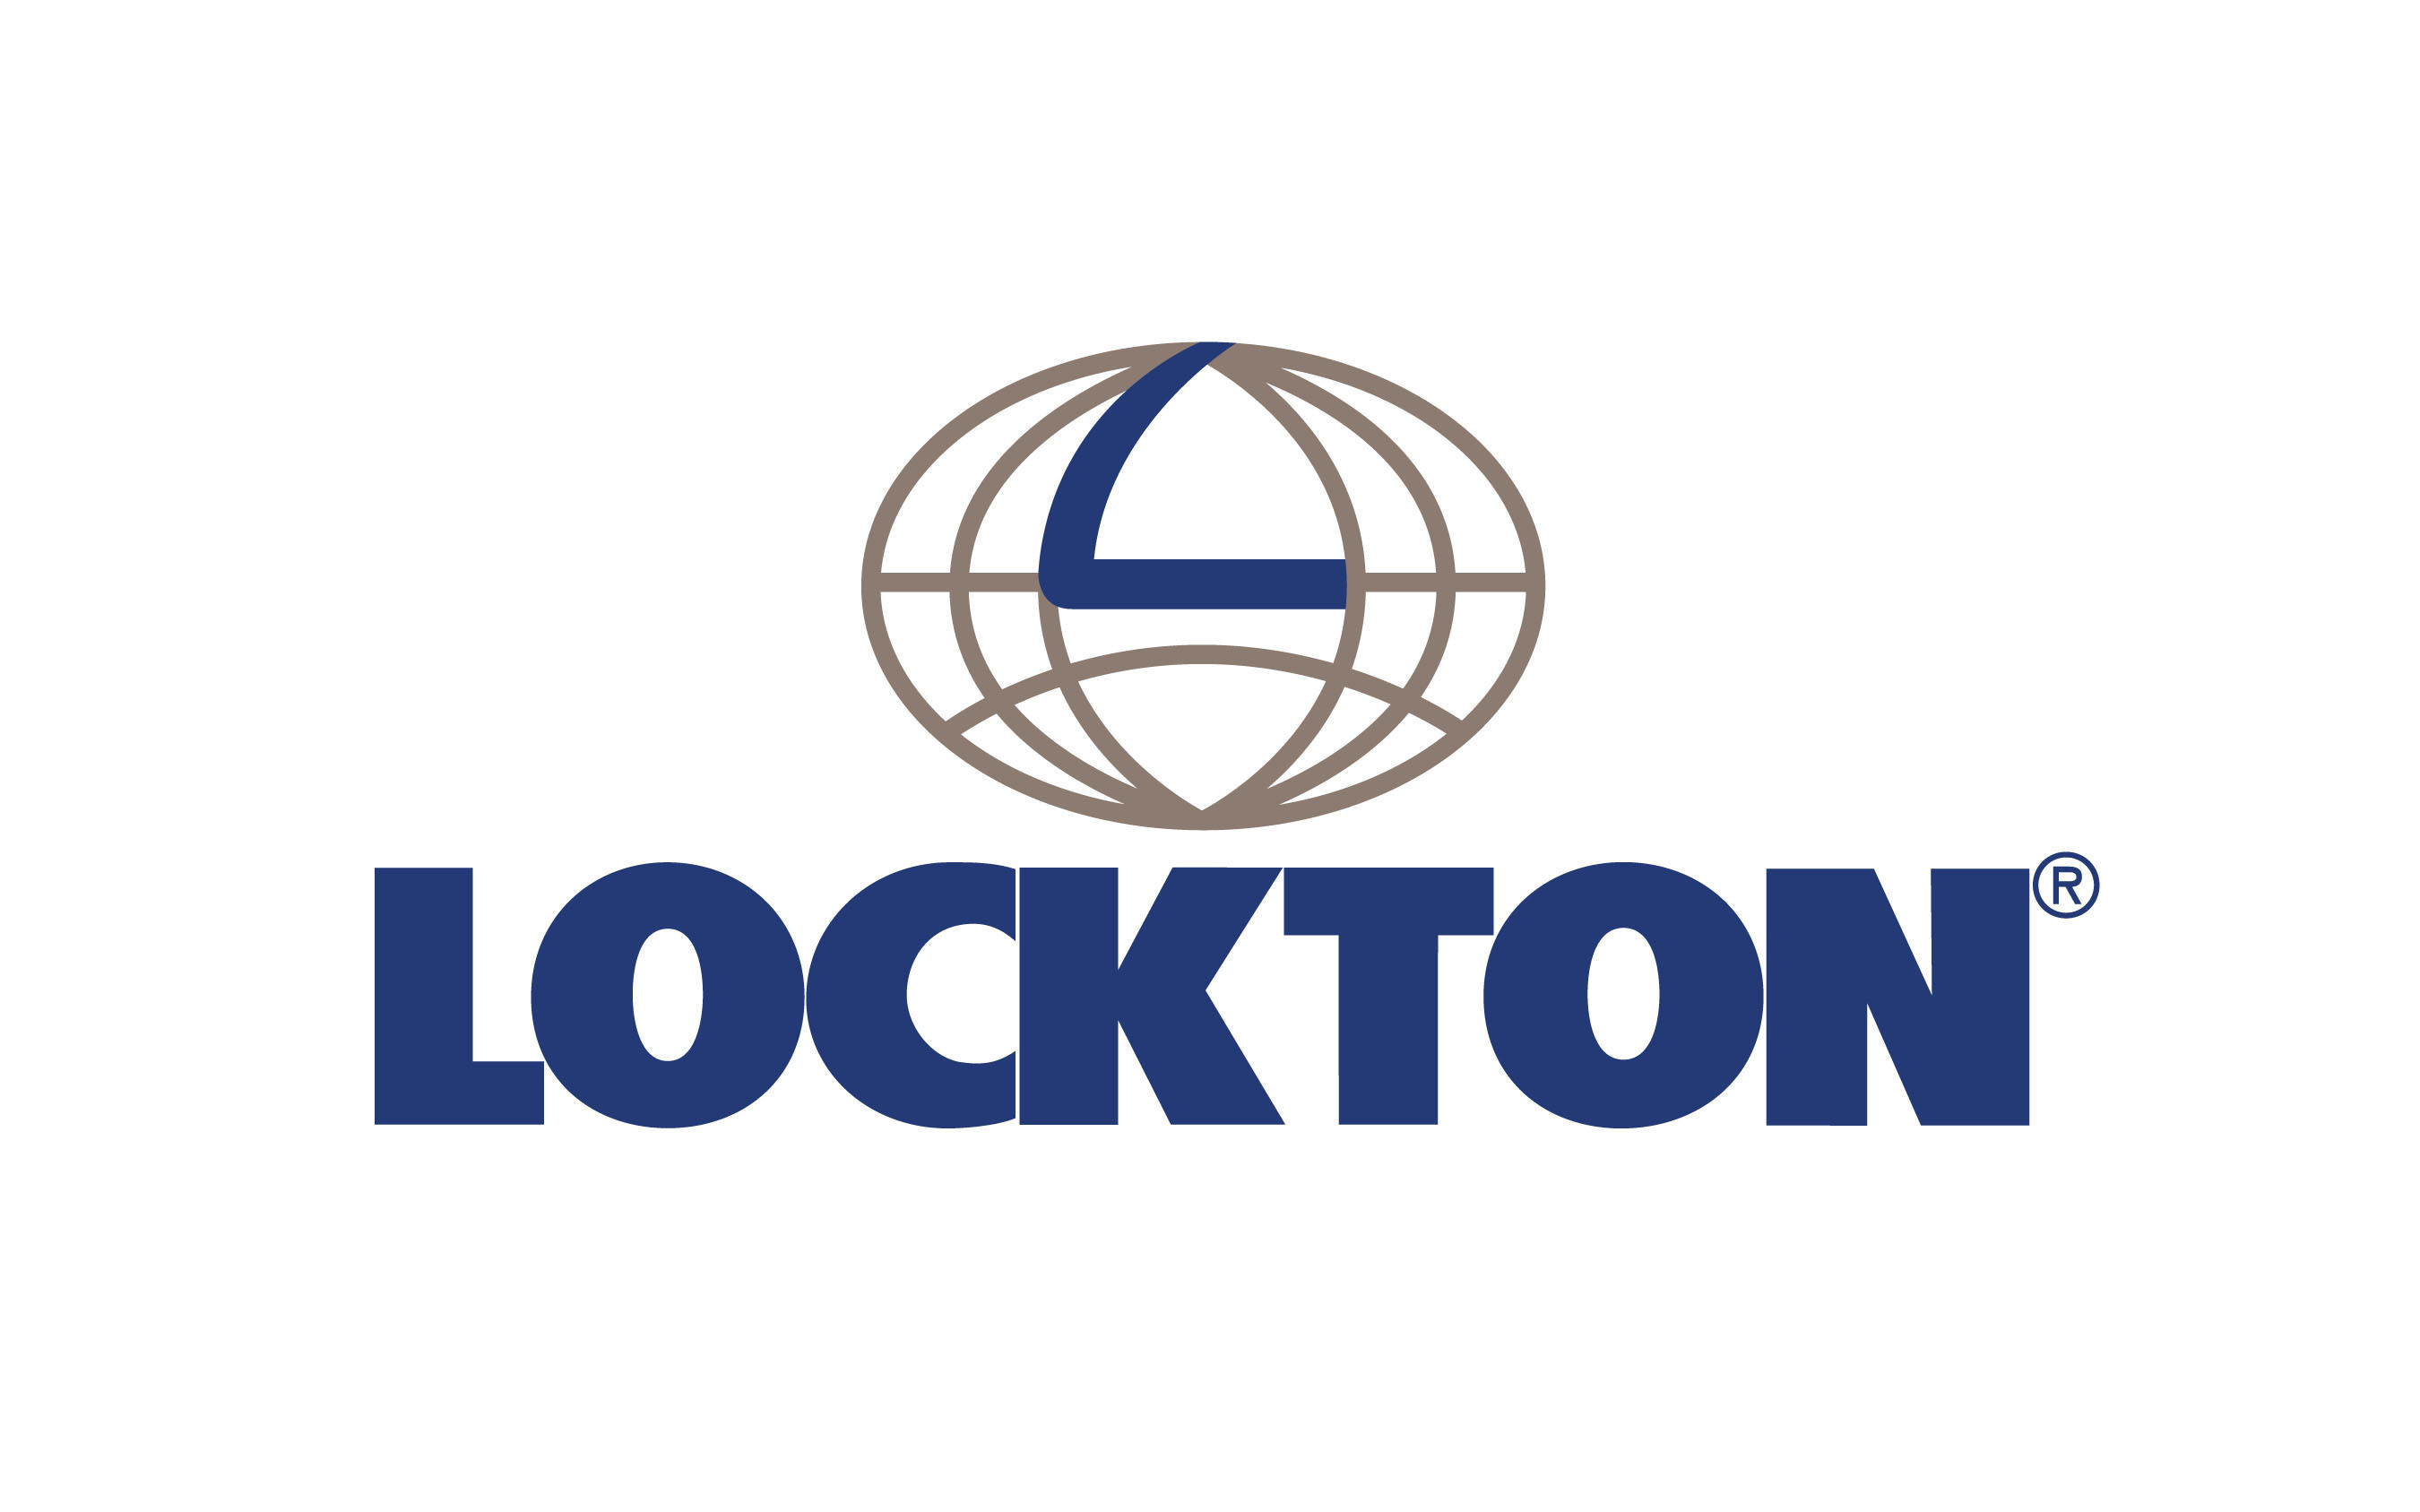 Lockton hires two MDs for Pacific region